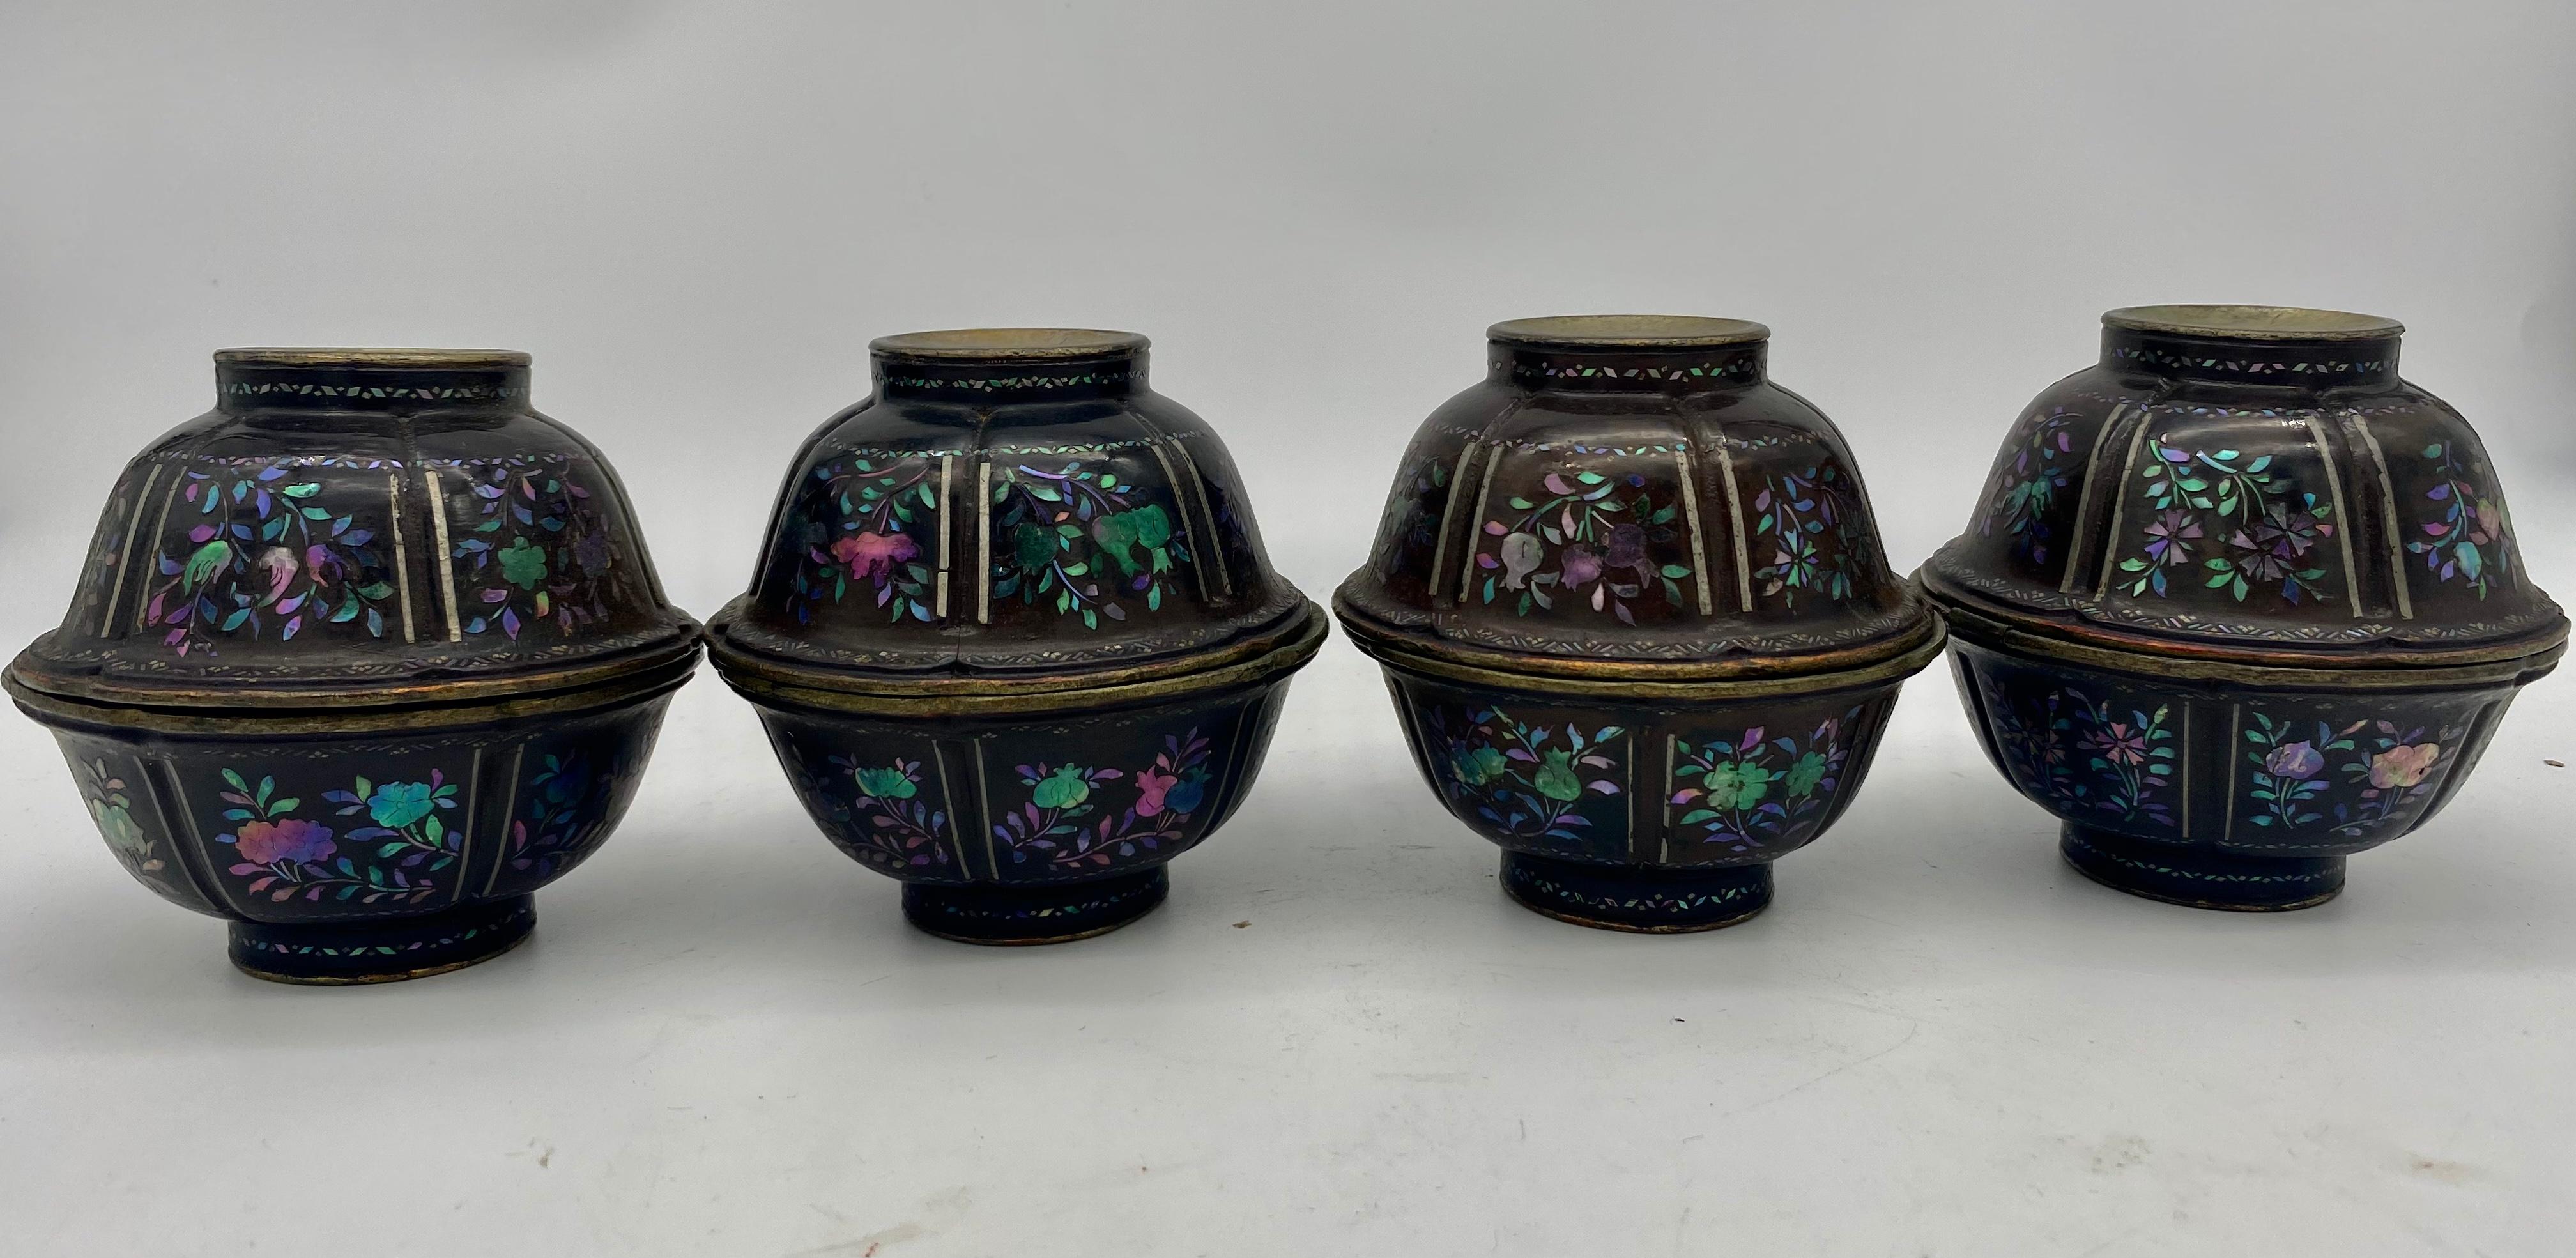 A fine set of 8 pieces Chinese lacquered and mother of pearl inlaid bowls with silvered interiors from the 18th century Qing Dynasty, The faces each of a thin sheet of distressed silver over a body of black lacquered wood with mother of pearl